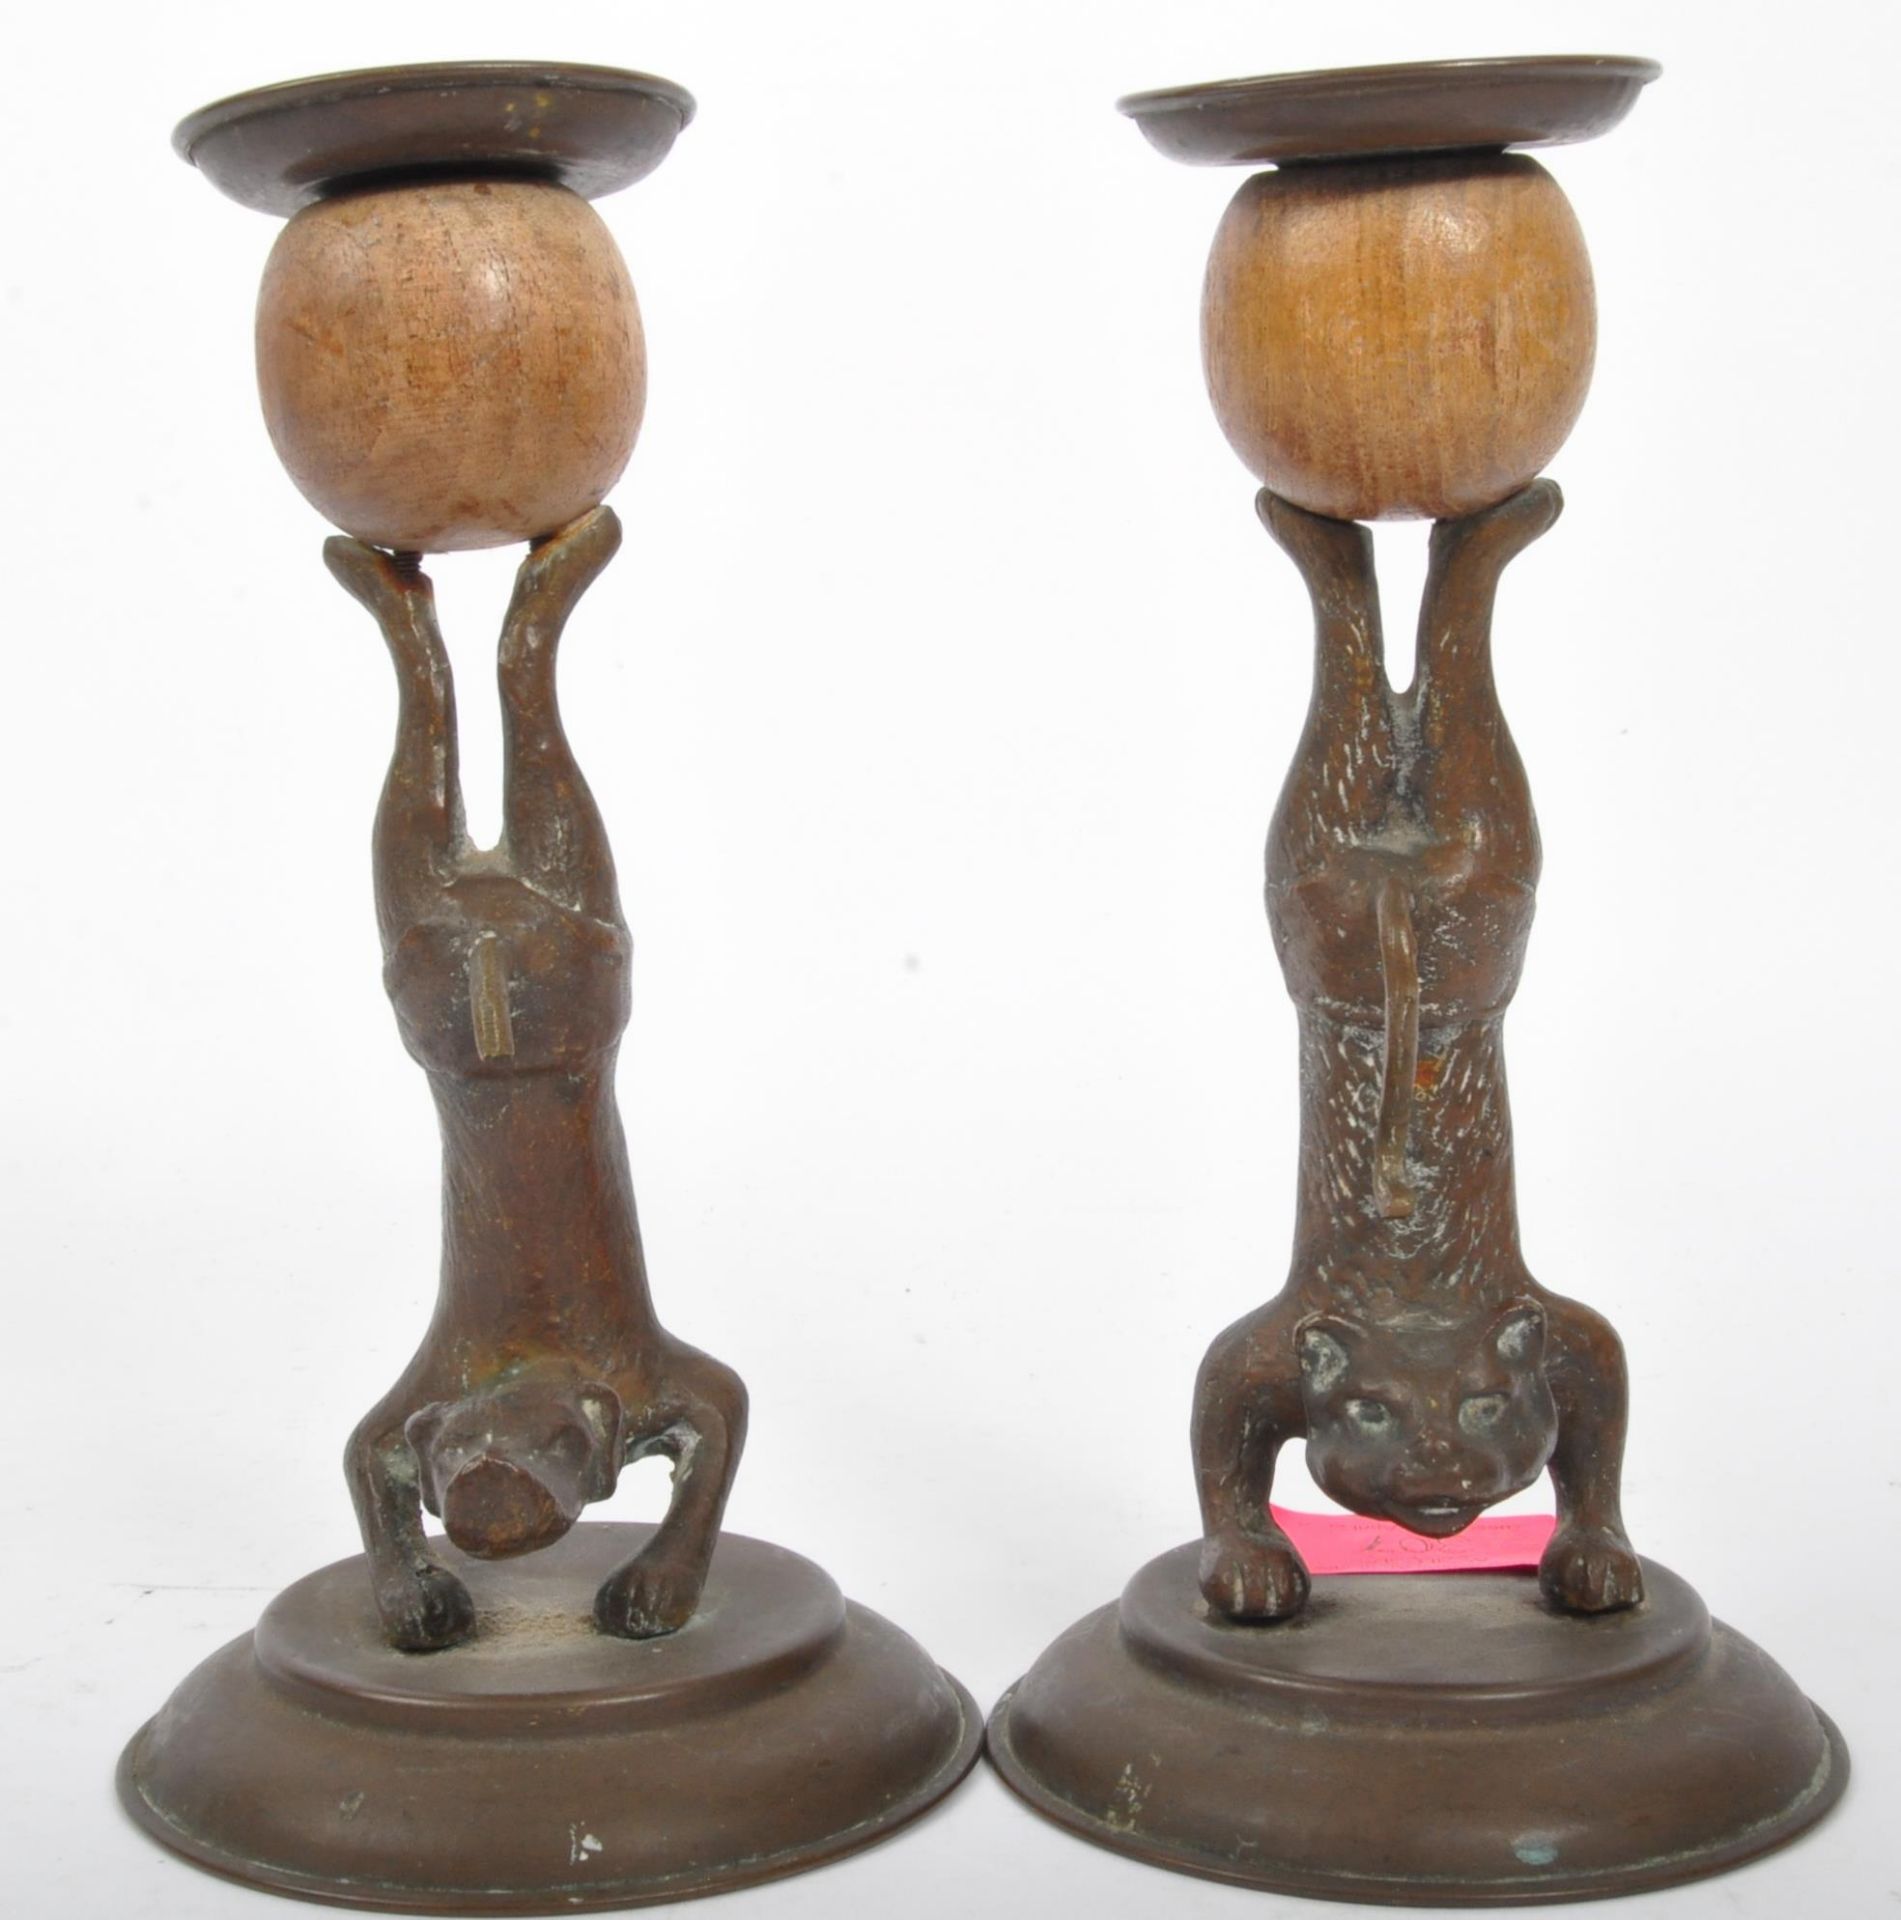 PAIR OF VINTAGE CIRCA 1970S ANIMAL CANDLE STICK HOLDERS